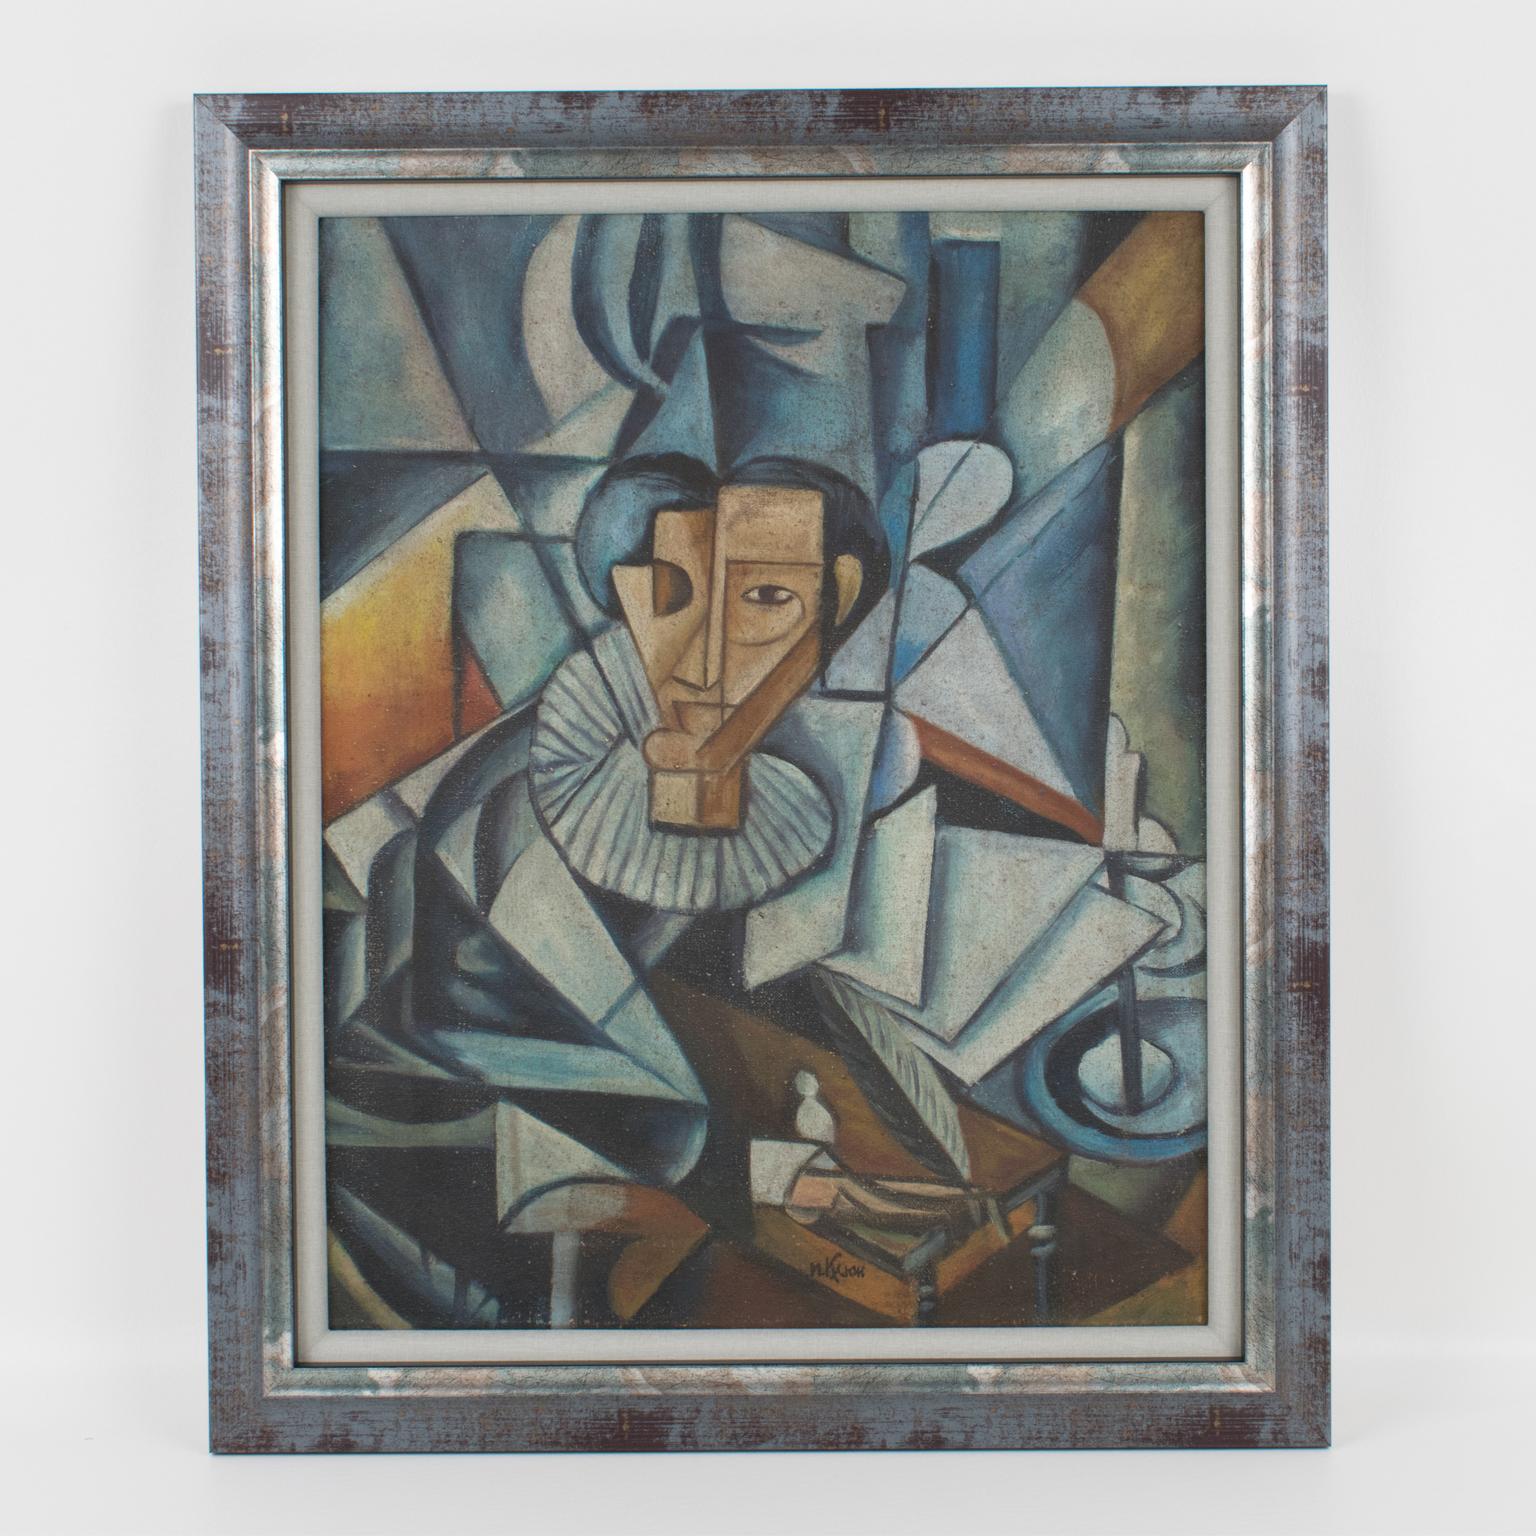 The Lawyer Cubist Oil on Canvas Painting by Ivan Kliun 1